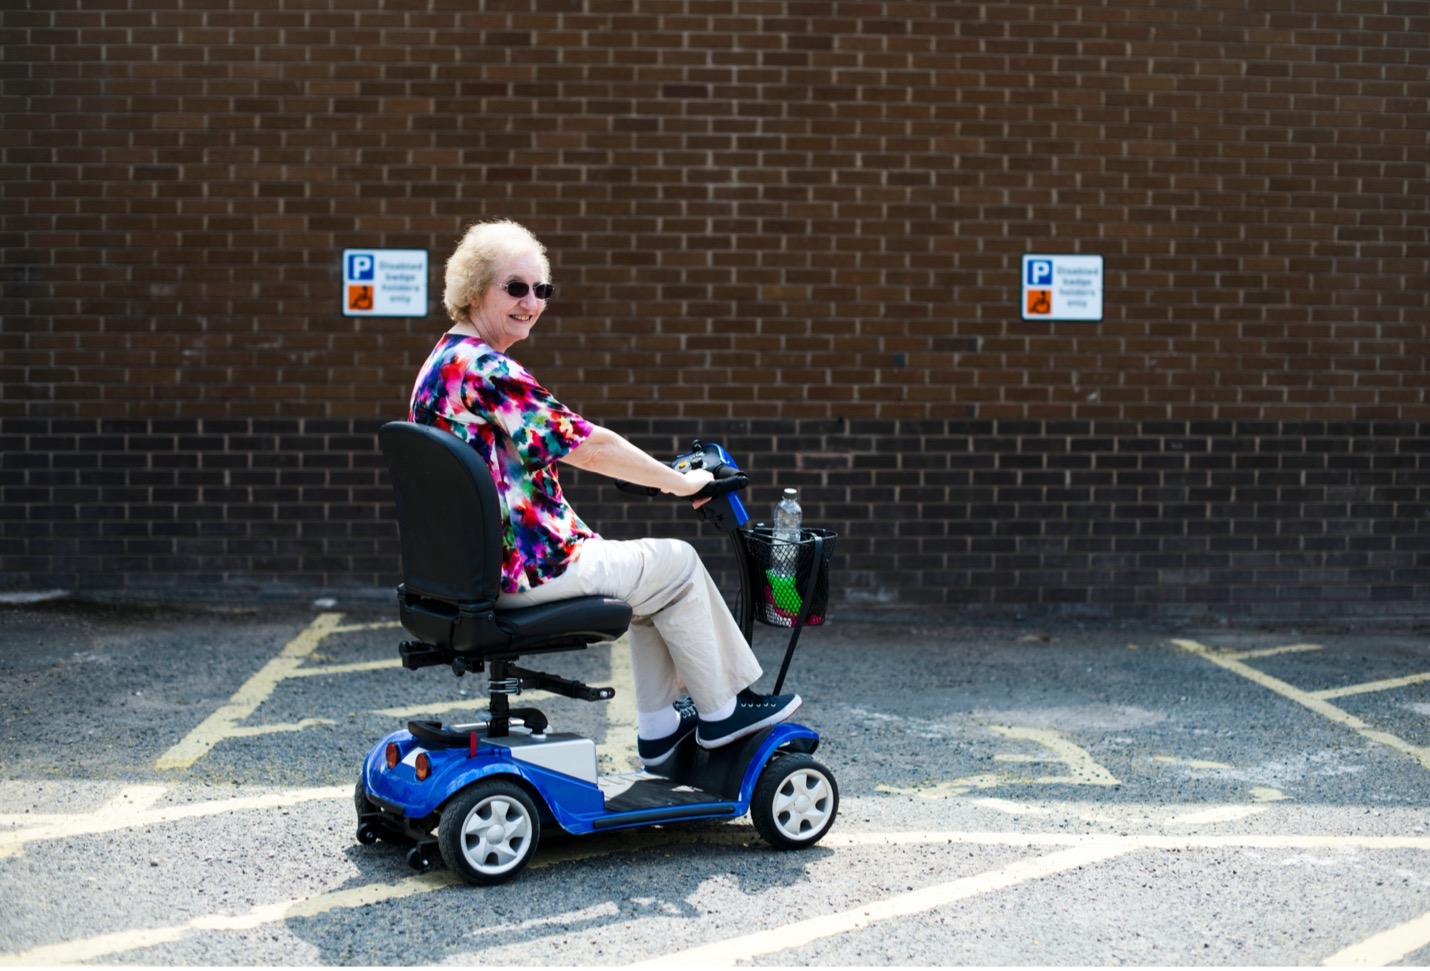 A smiling elderly woman on a motorized scooter in a parking lot on a sunny day